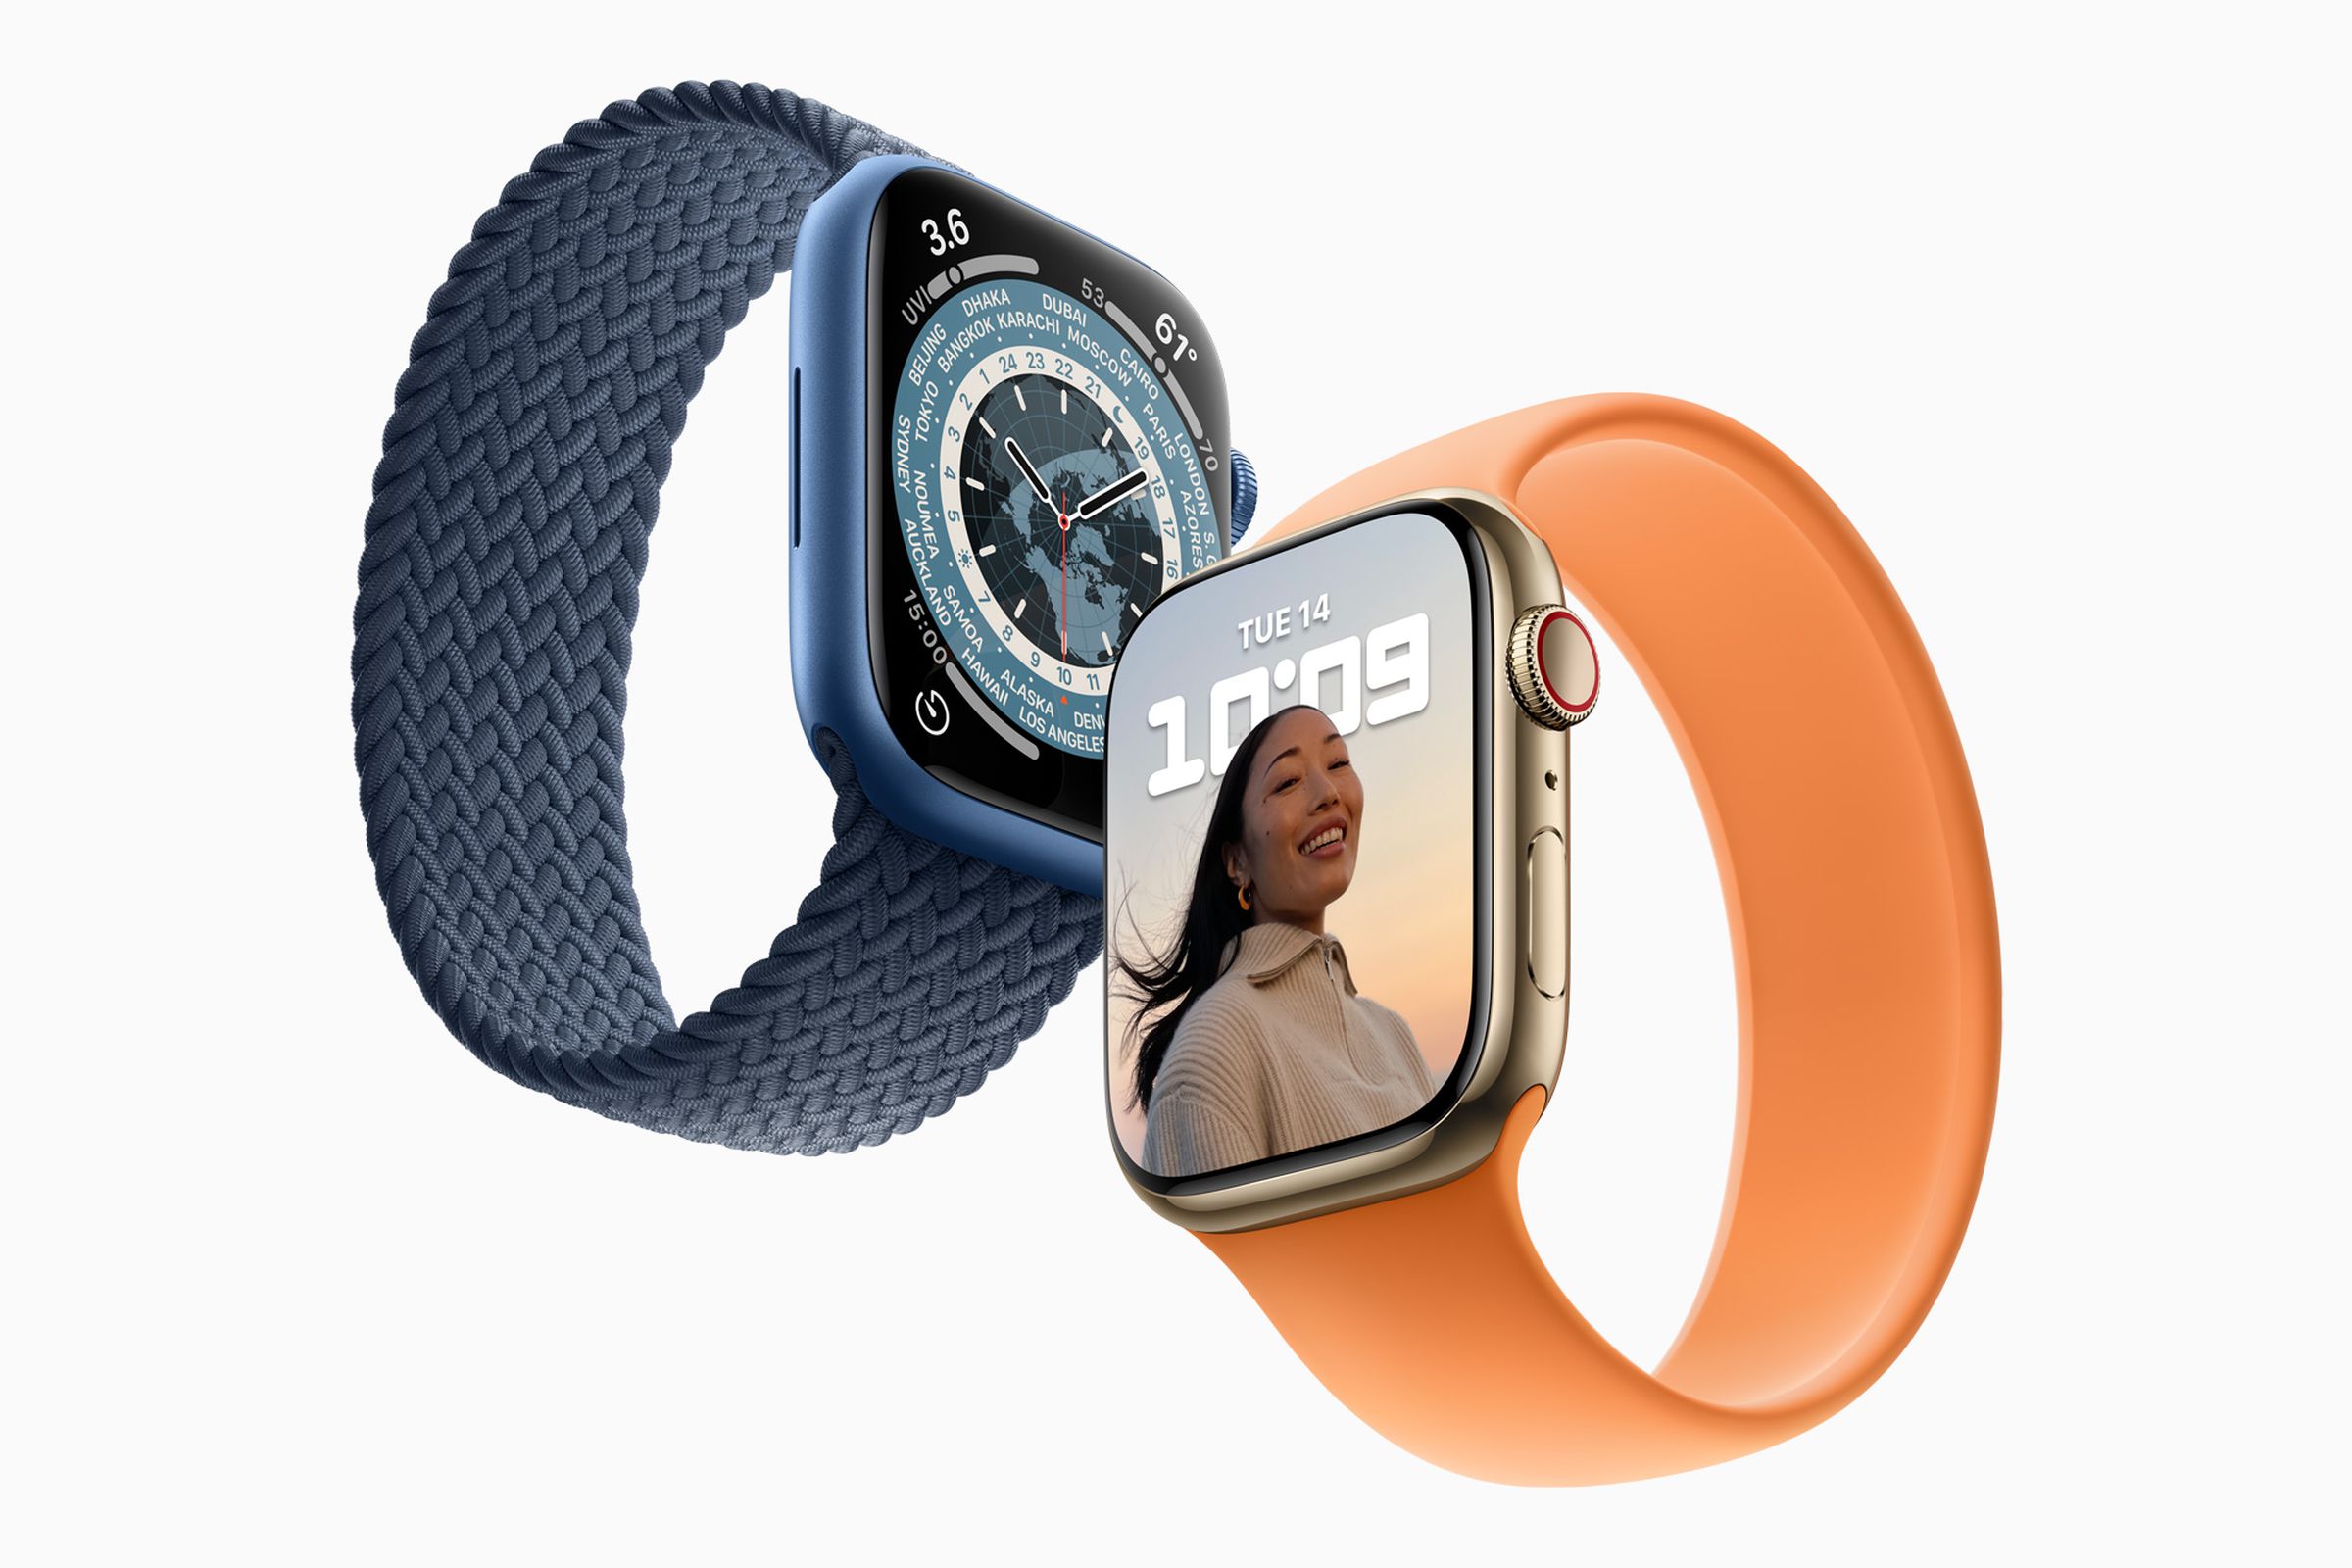 Apple Watch Series 7 includes a bigger display.